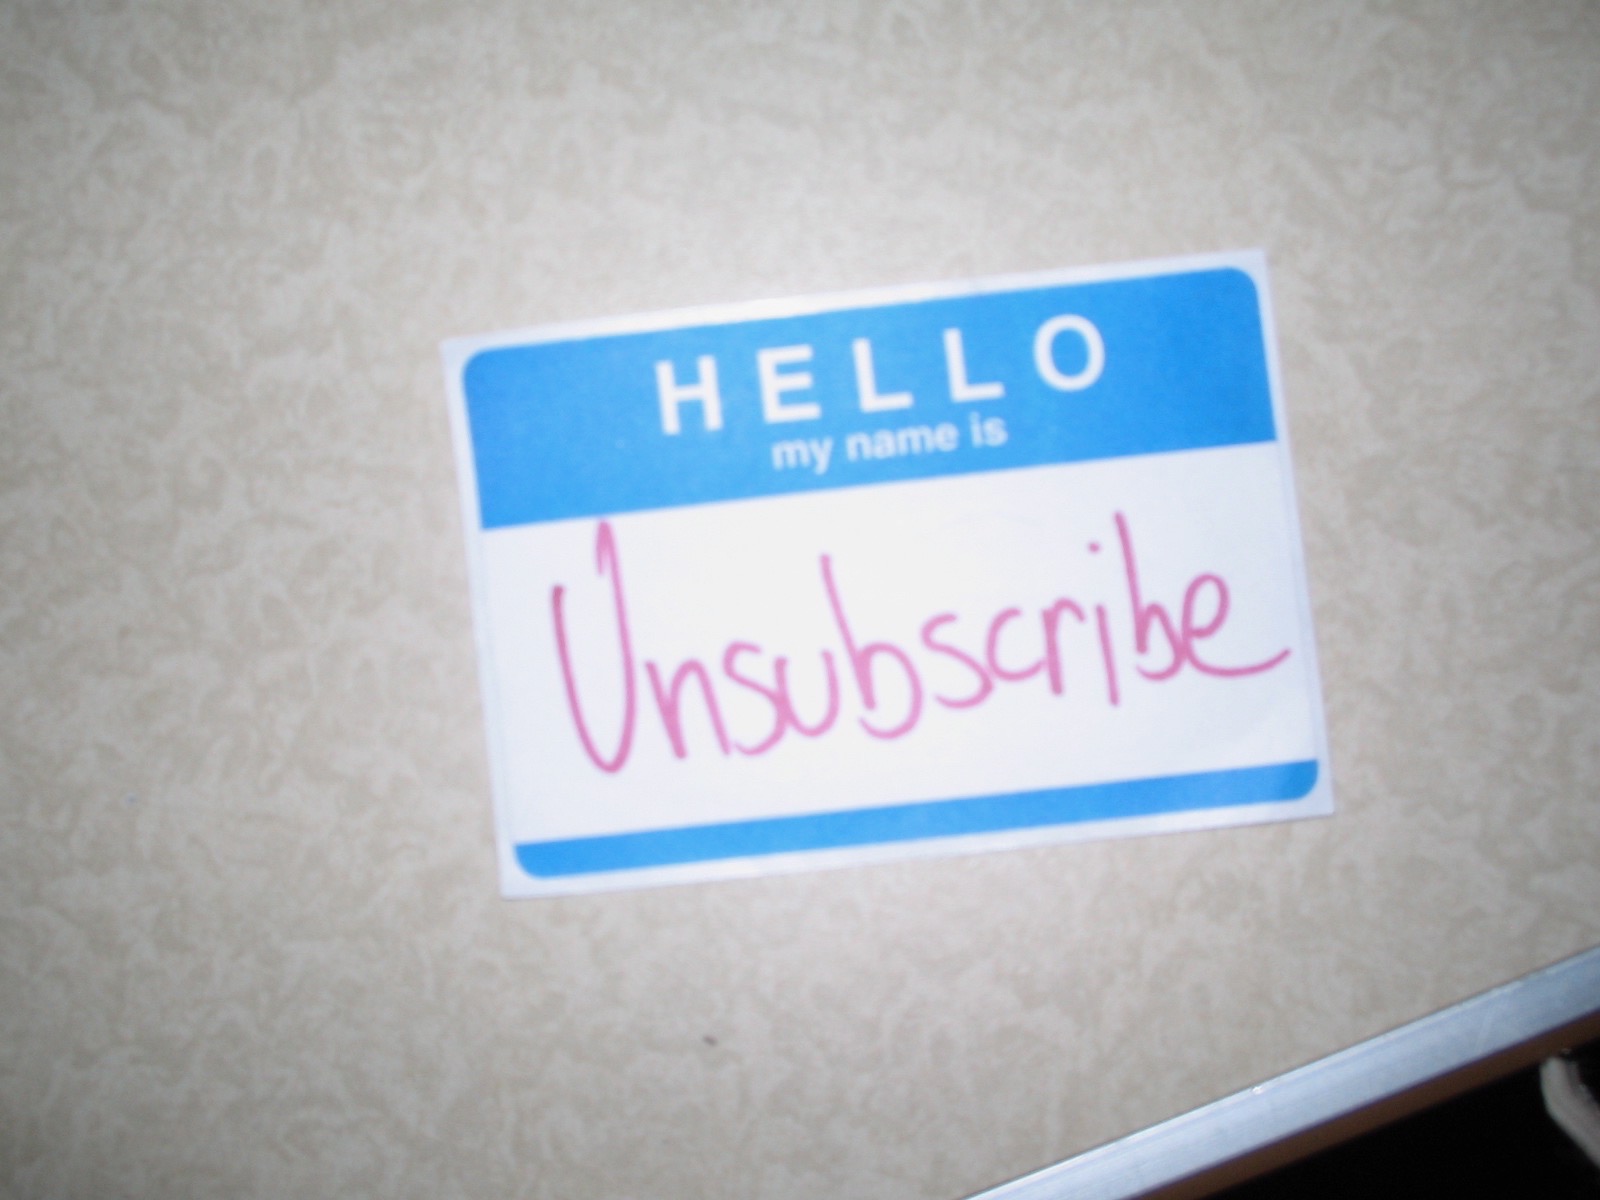 Name tag sticker where the handwritten name says Unsubscribe.